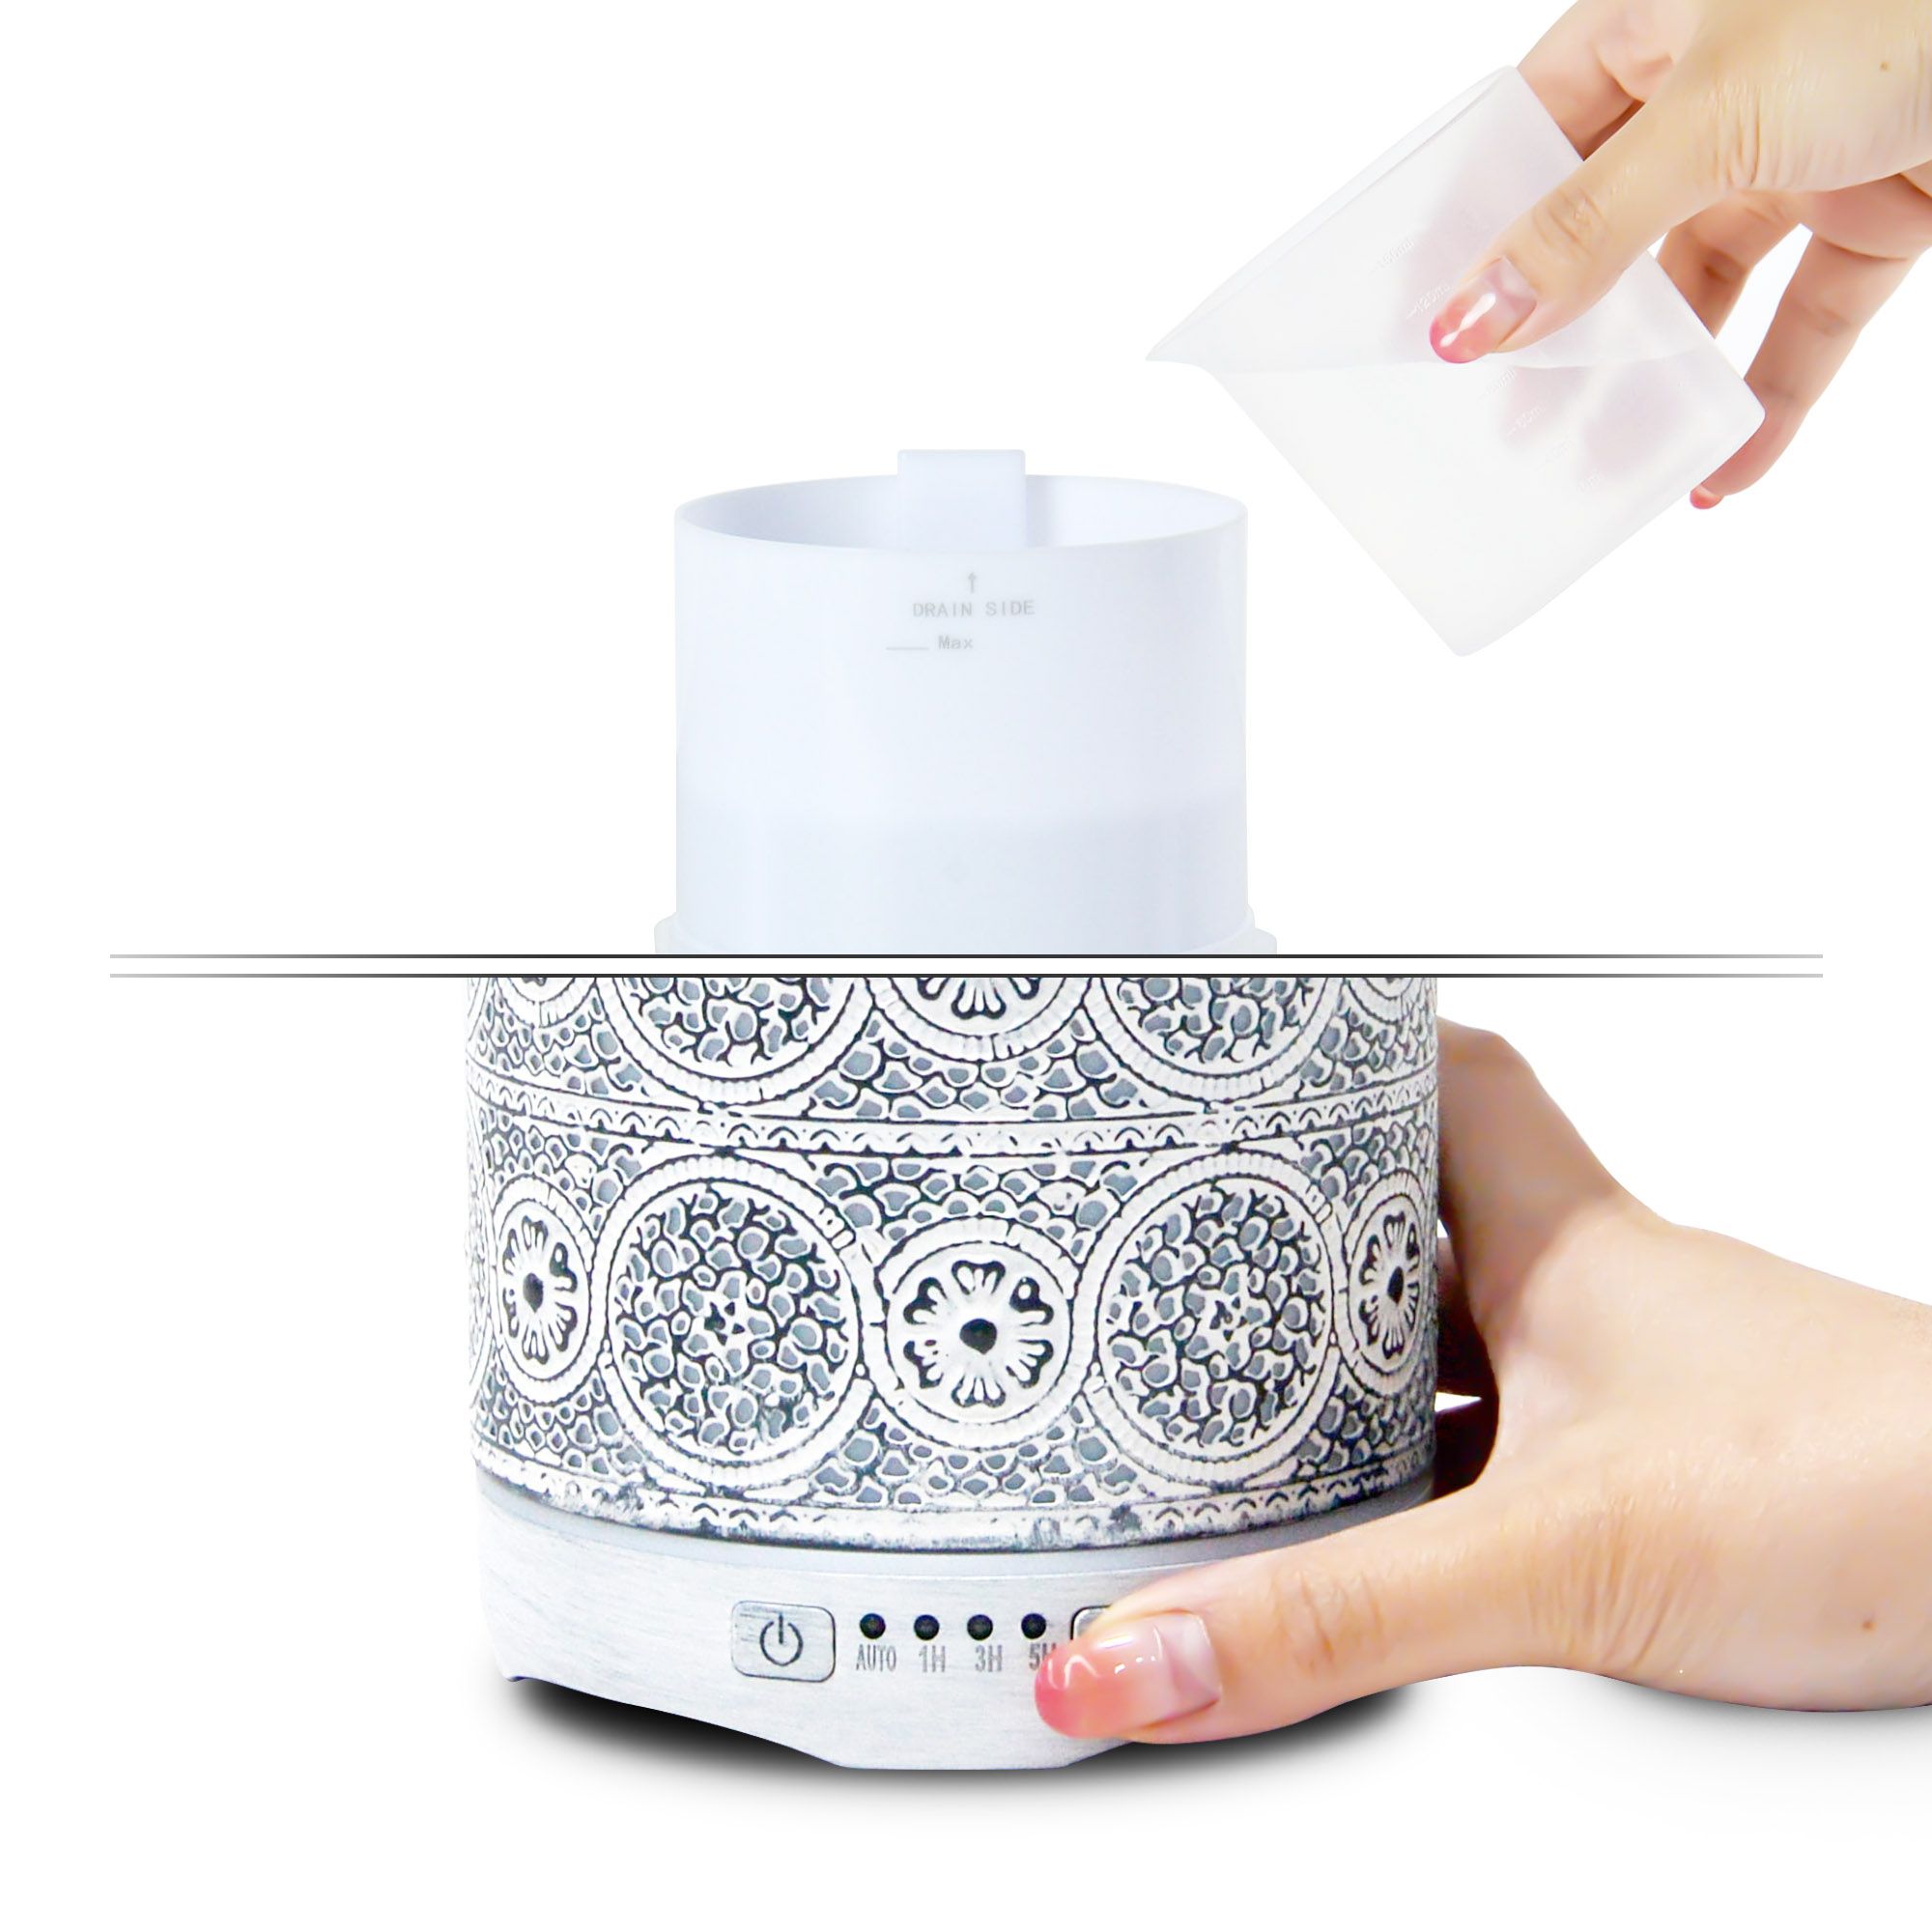 mbeat® activiva Metal Essential Oil and Aroma Diffuser-Vintage White -260ml (L)